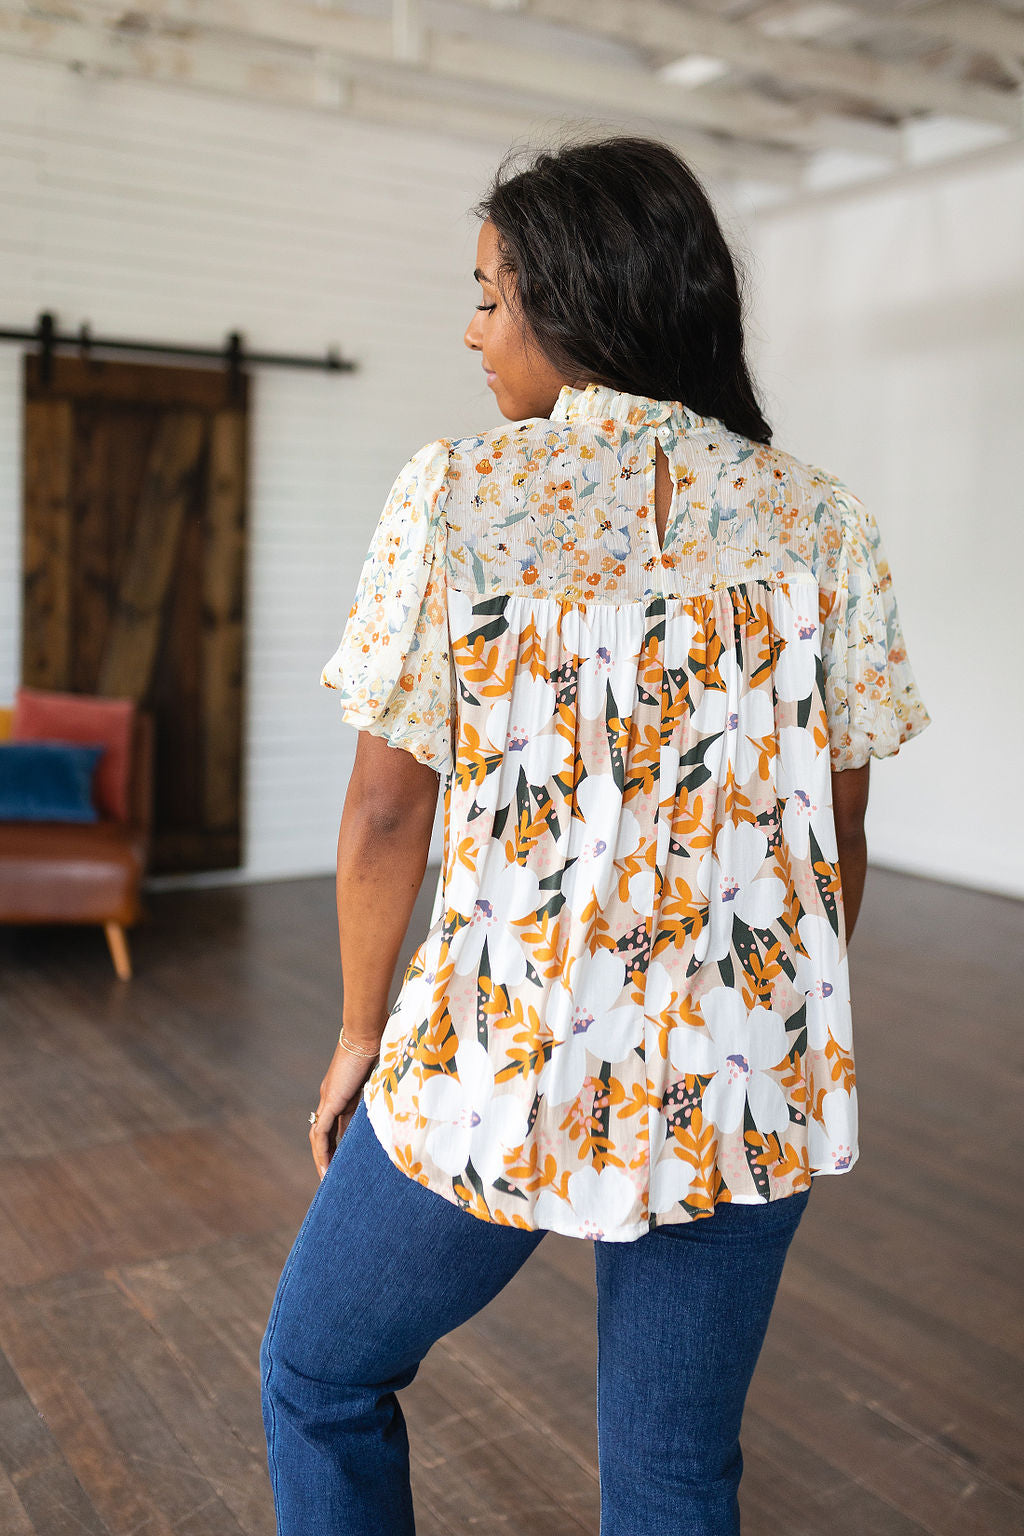 Daydreamer Mixed Floral Top - WEBSITE EXCLUSIVE